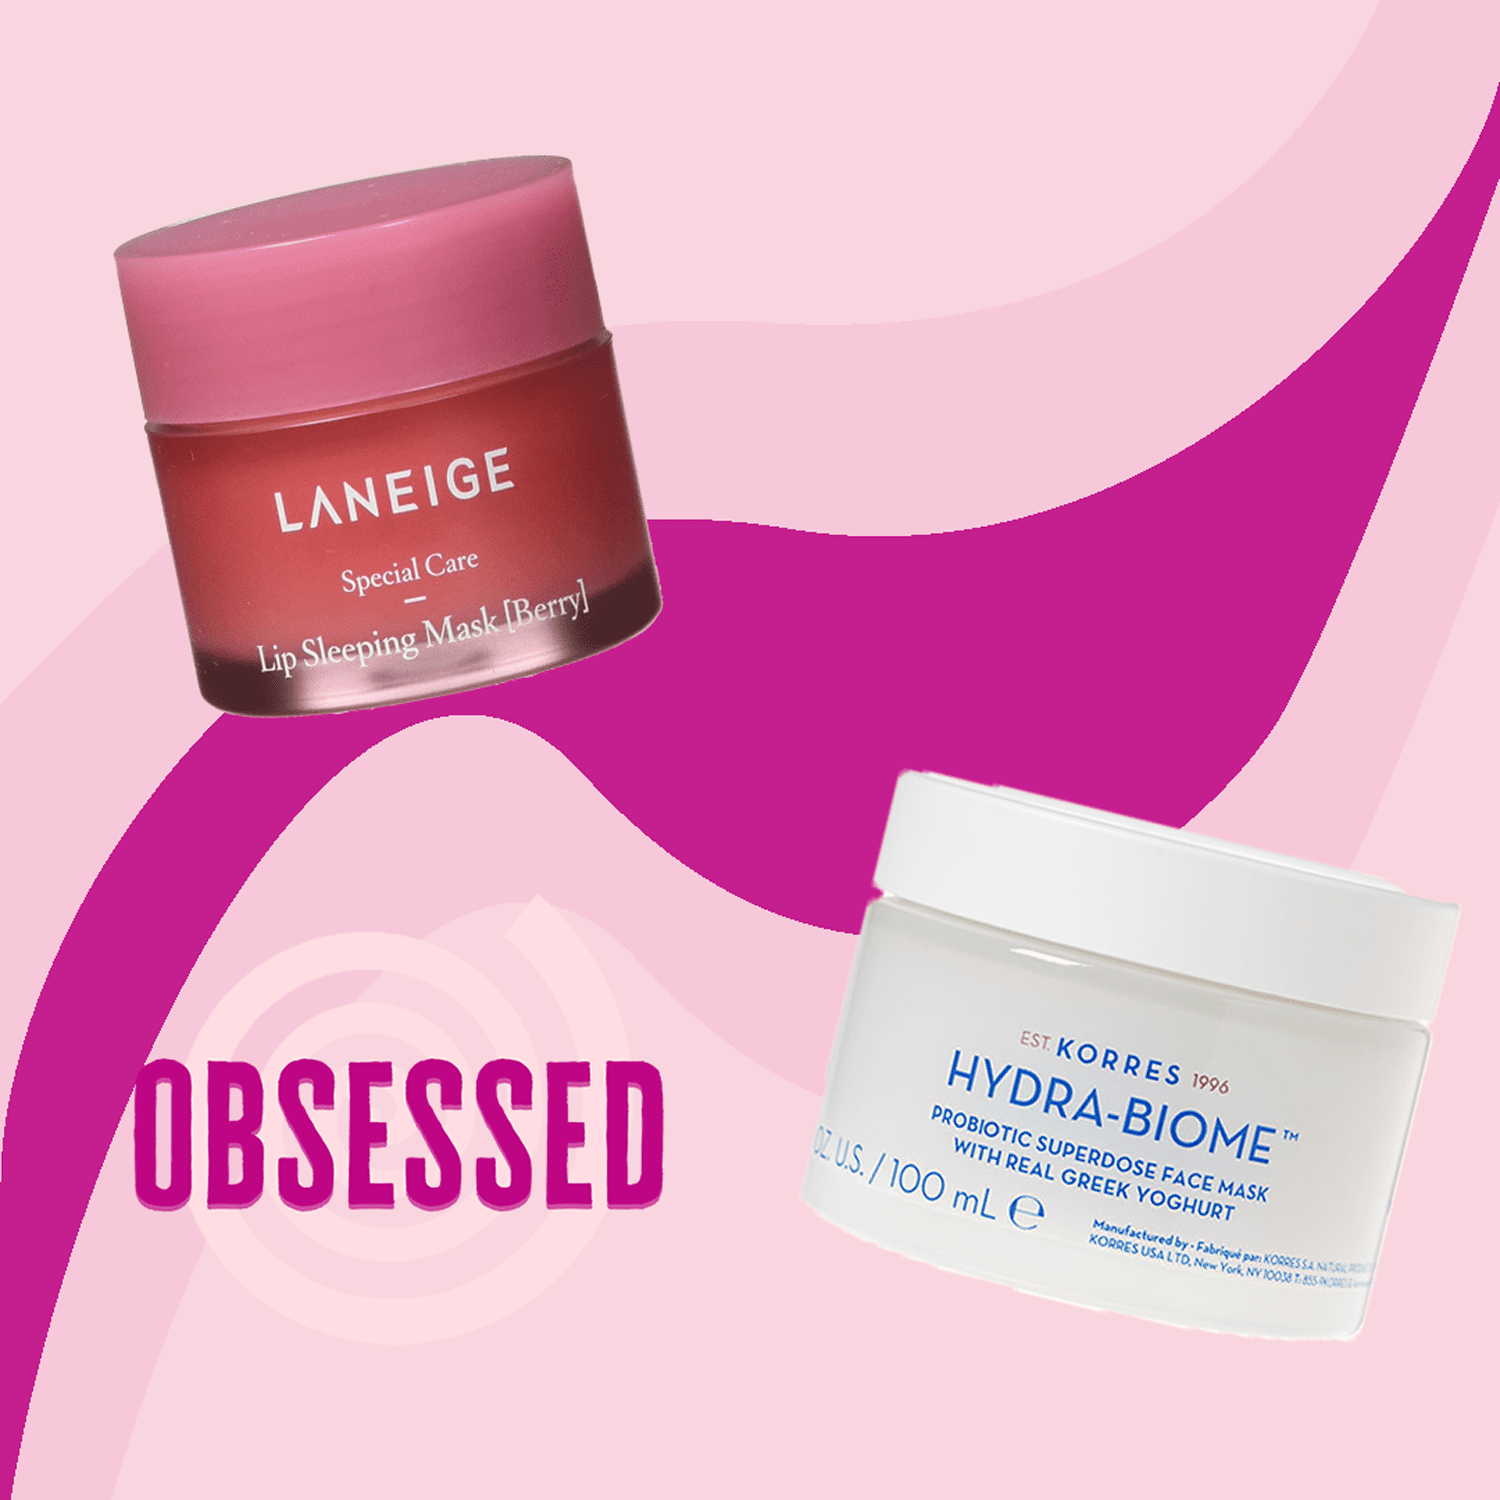 2 skin care pots with a graphic background and the word "Obsessed"